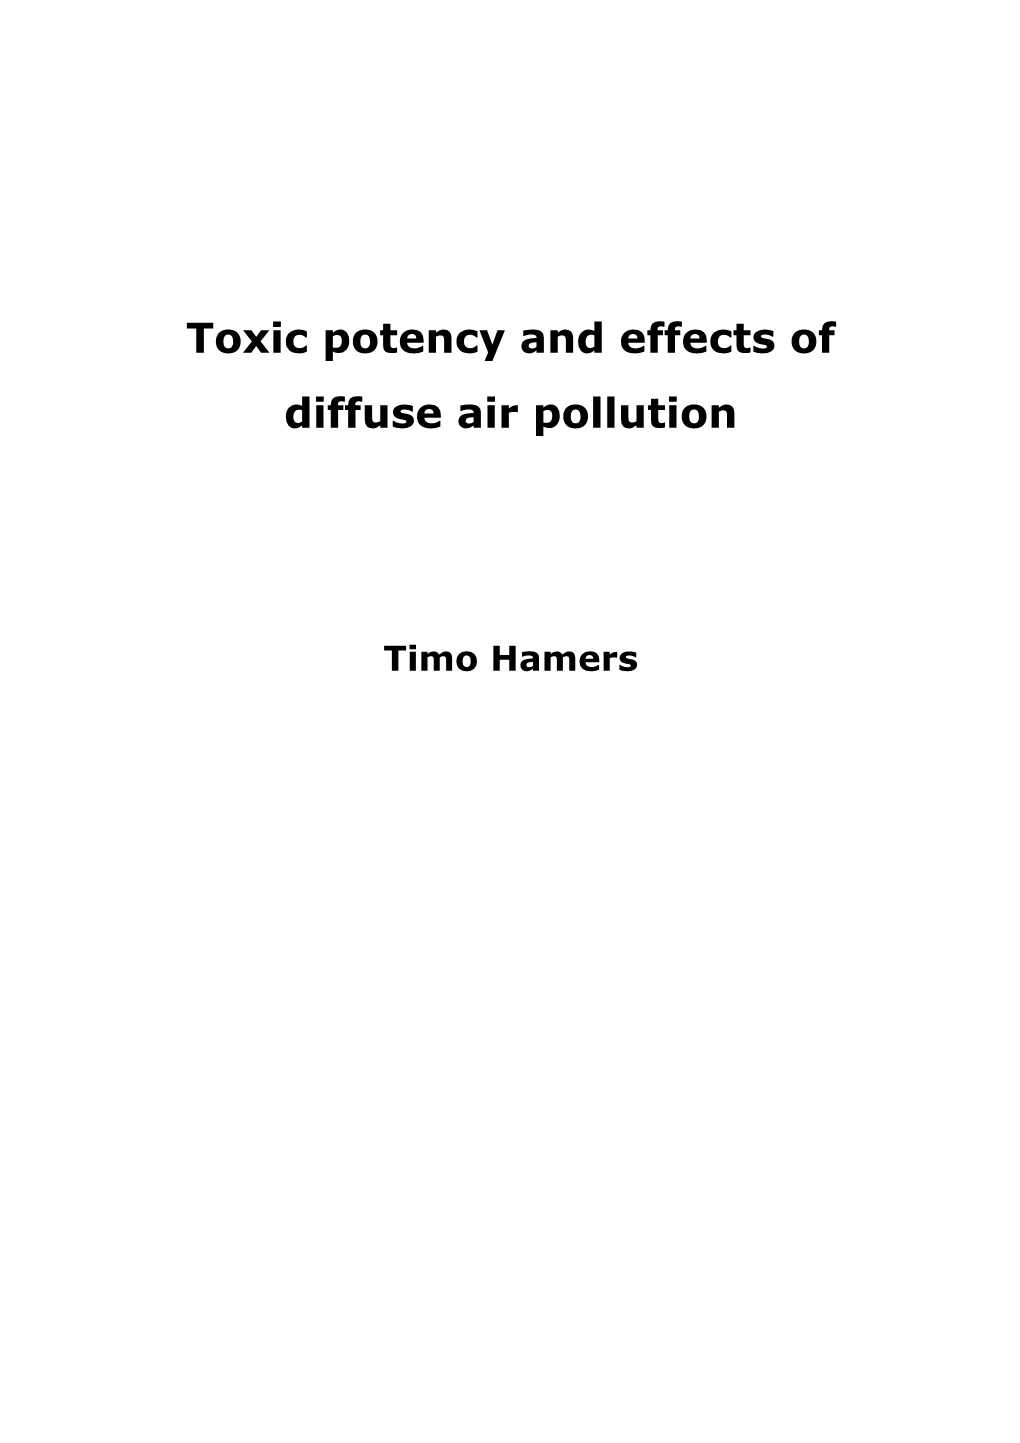 Toxic Potency and Effects of Diffuse Air Pollution